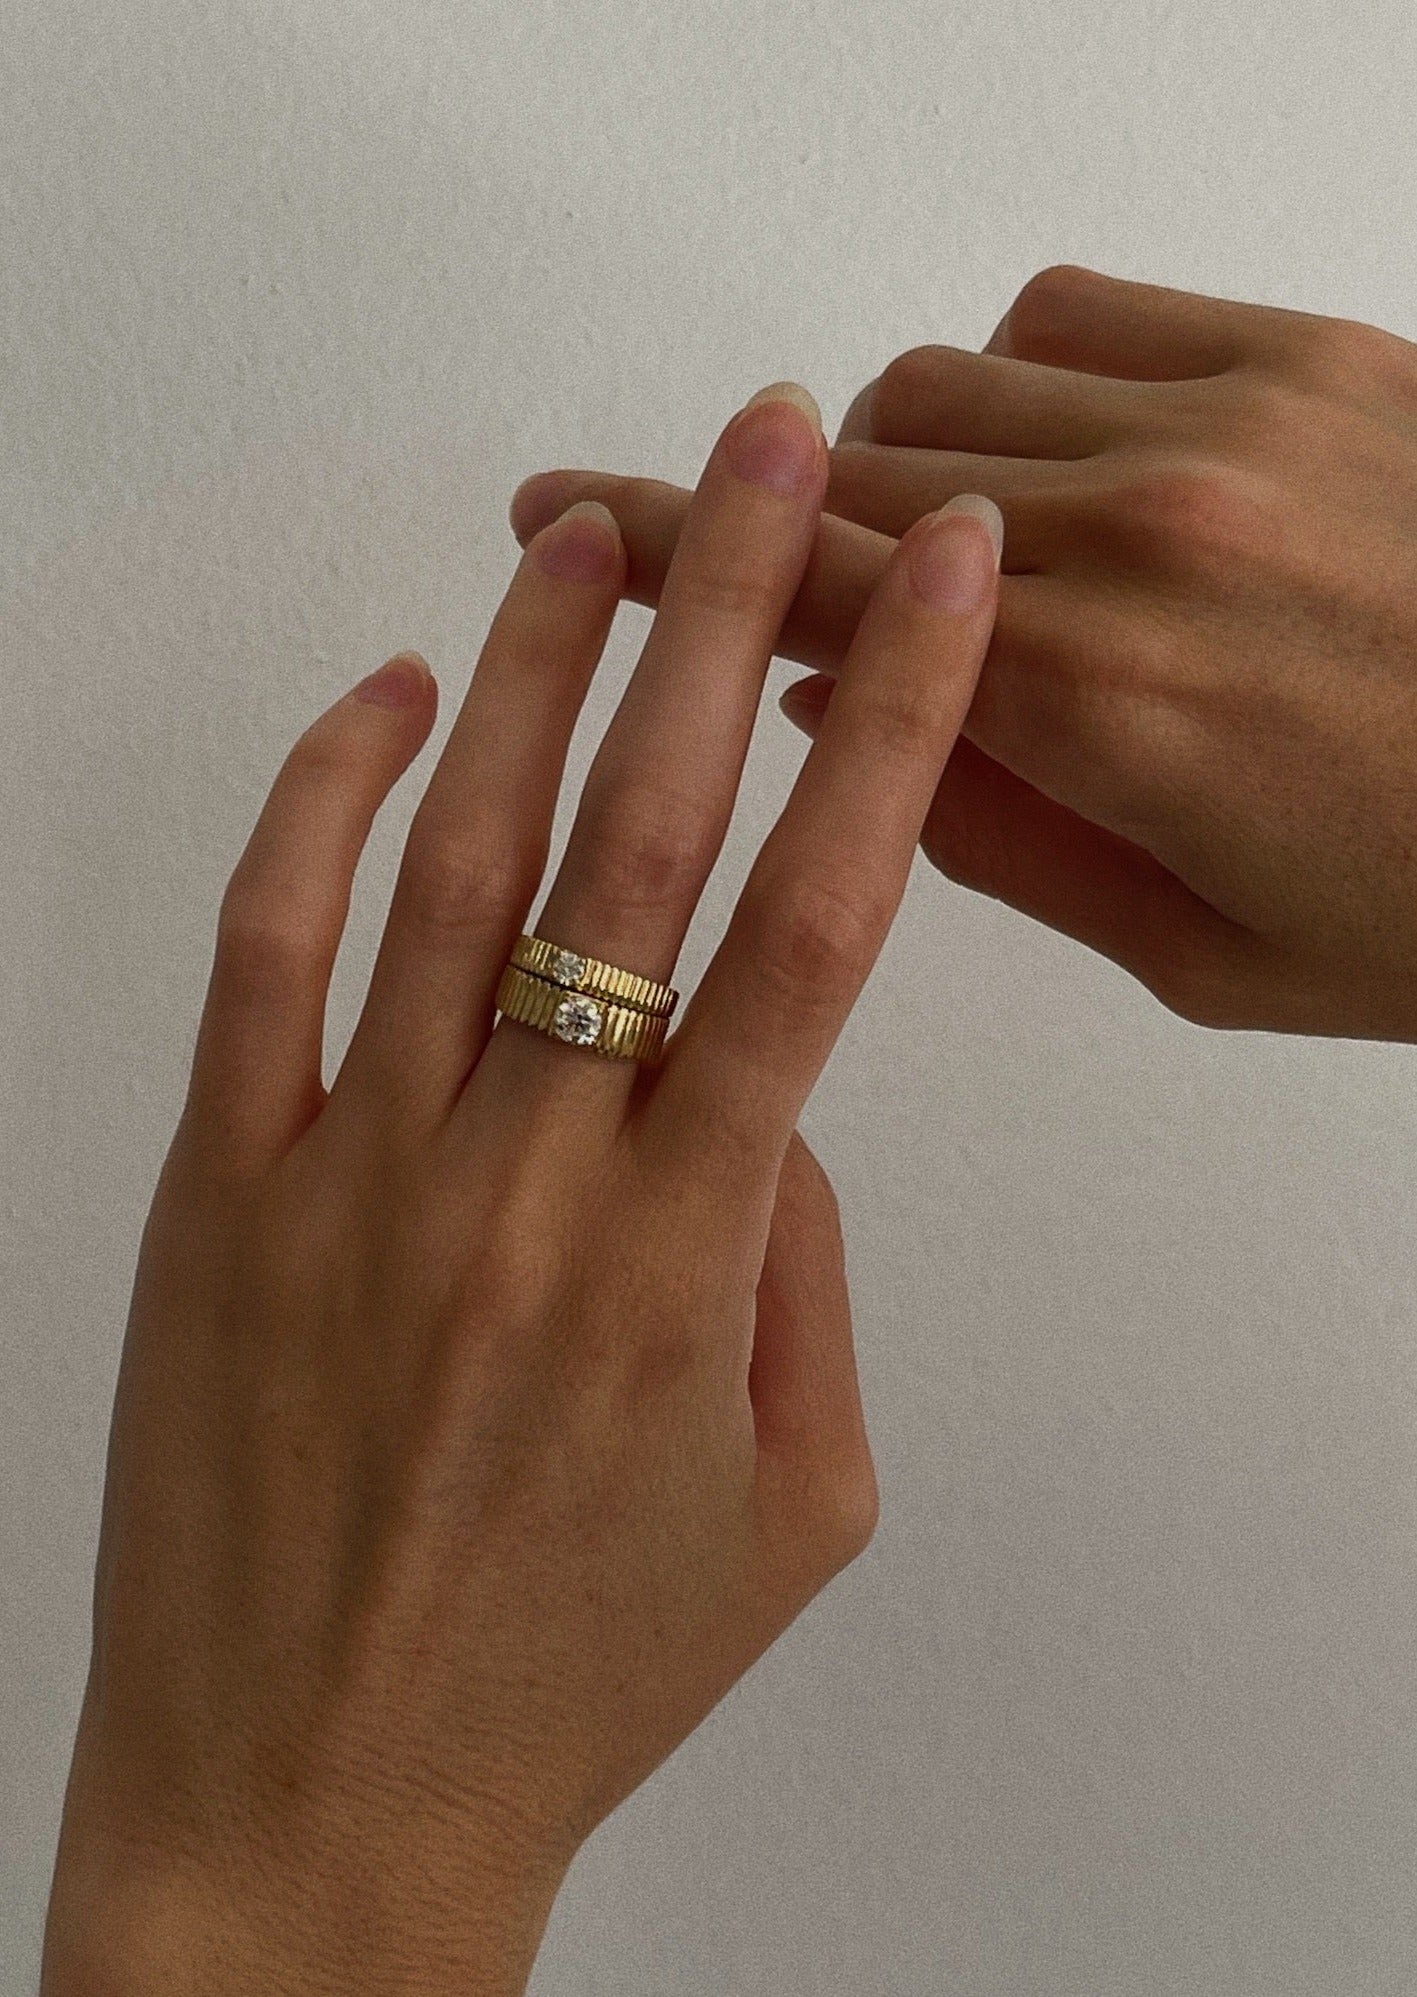 alt="Mini Solis Ribbed Ring II with solis ribbed ring II"